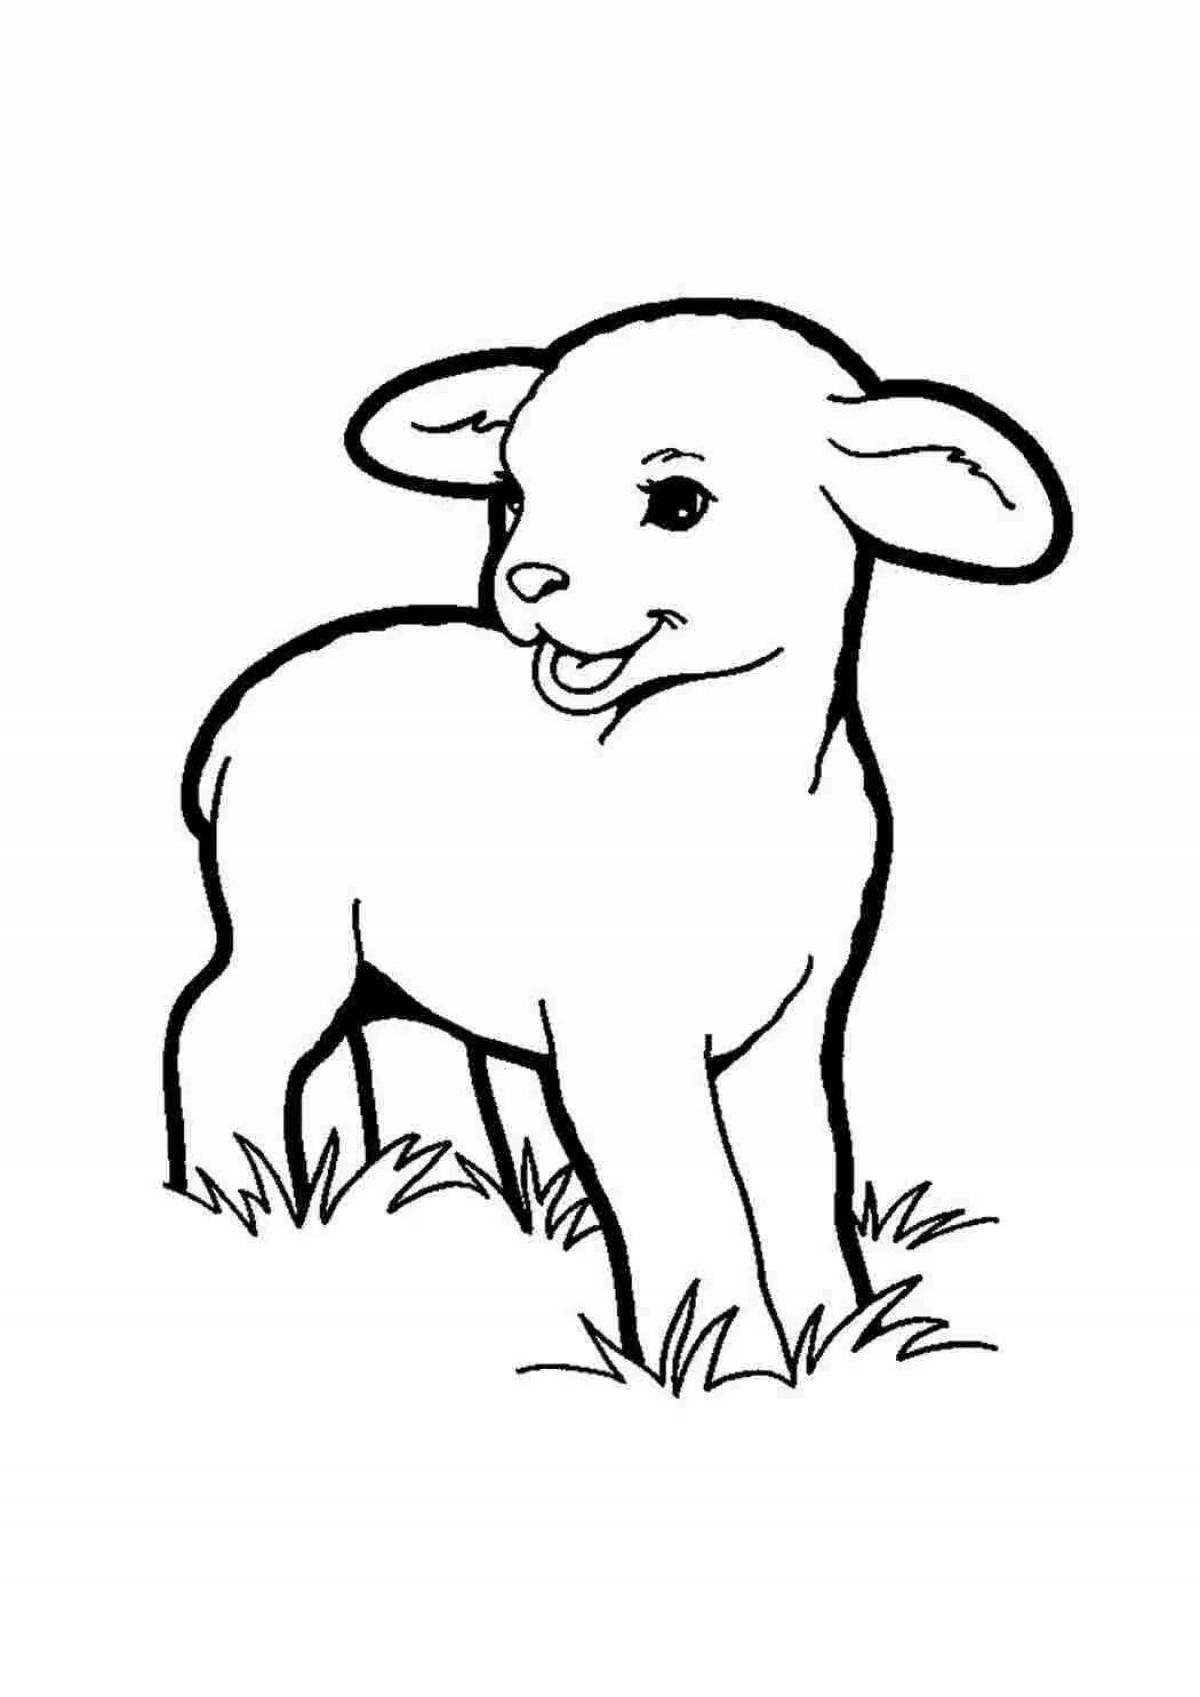 Naughty sheep coloring for kids